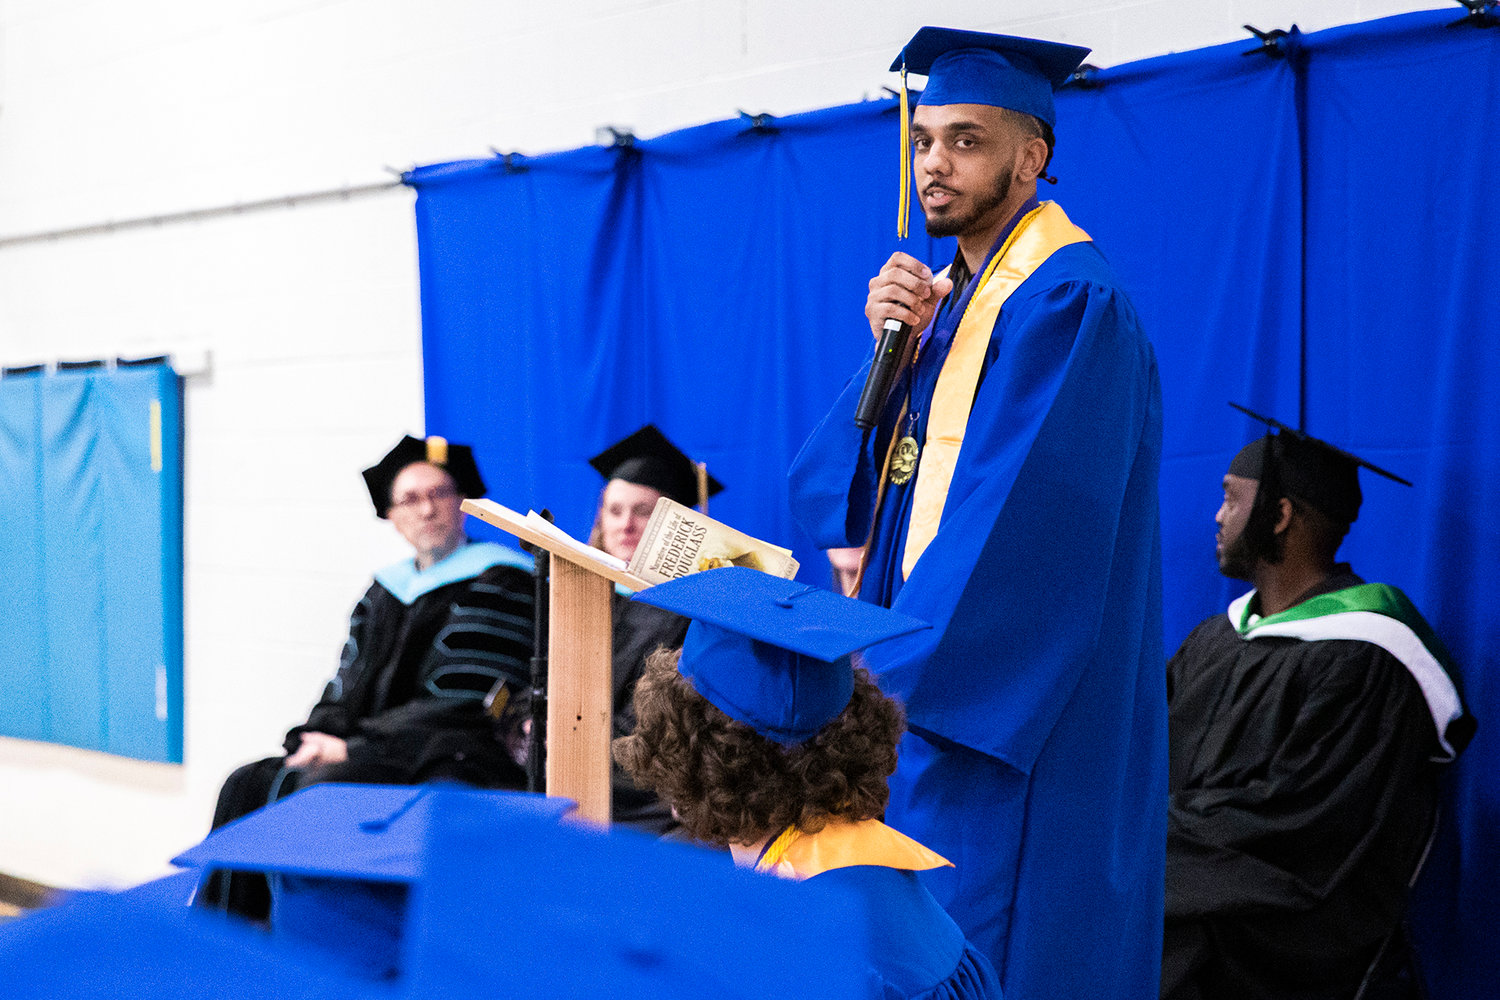 Rodney Strickland reads a quote from Nelson Mandela during his speech at a graduation ceremony for Centralia College graduates held at the Green Hill School on Wednesday in Chehalis.